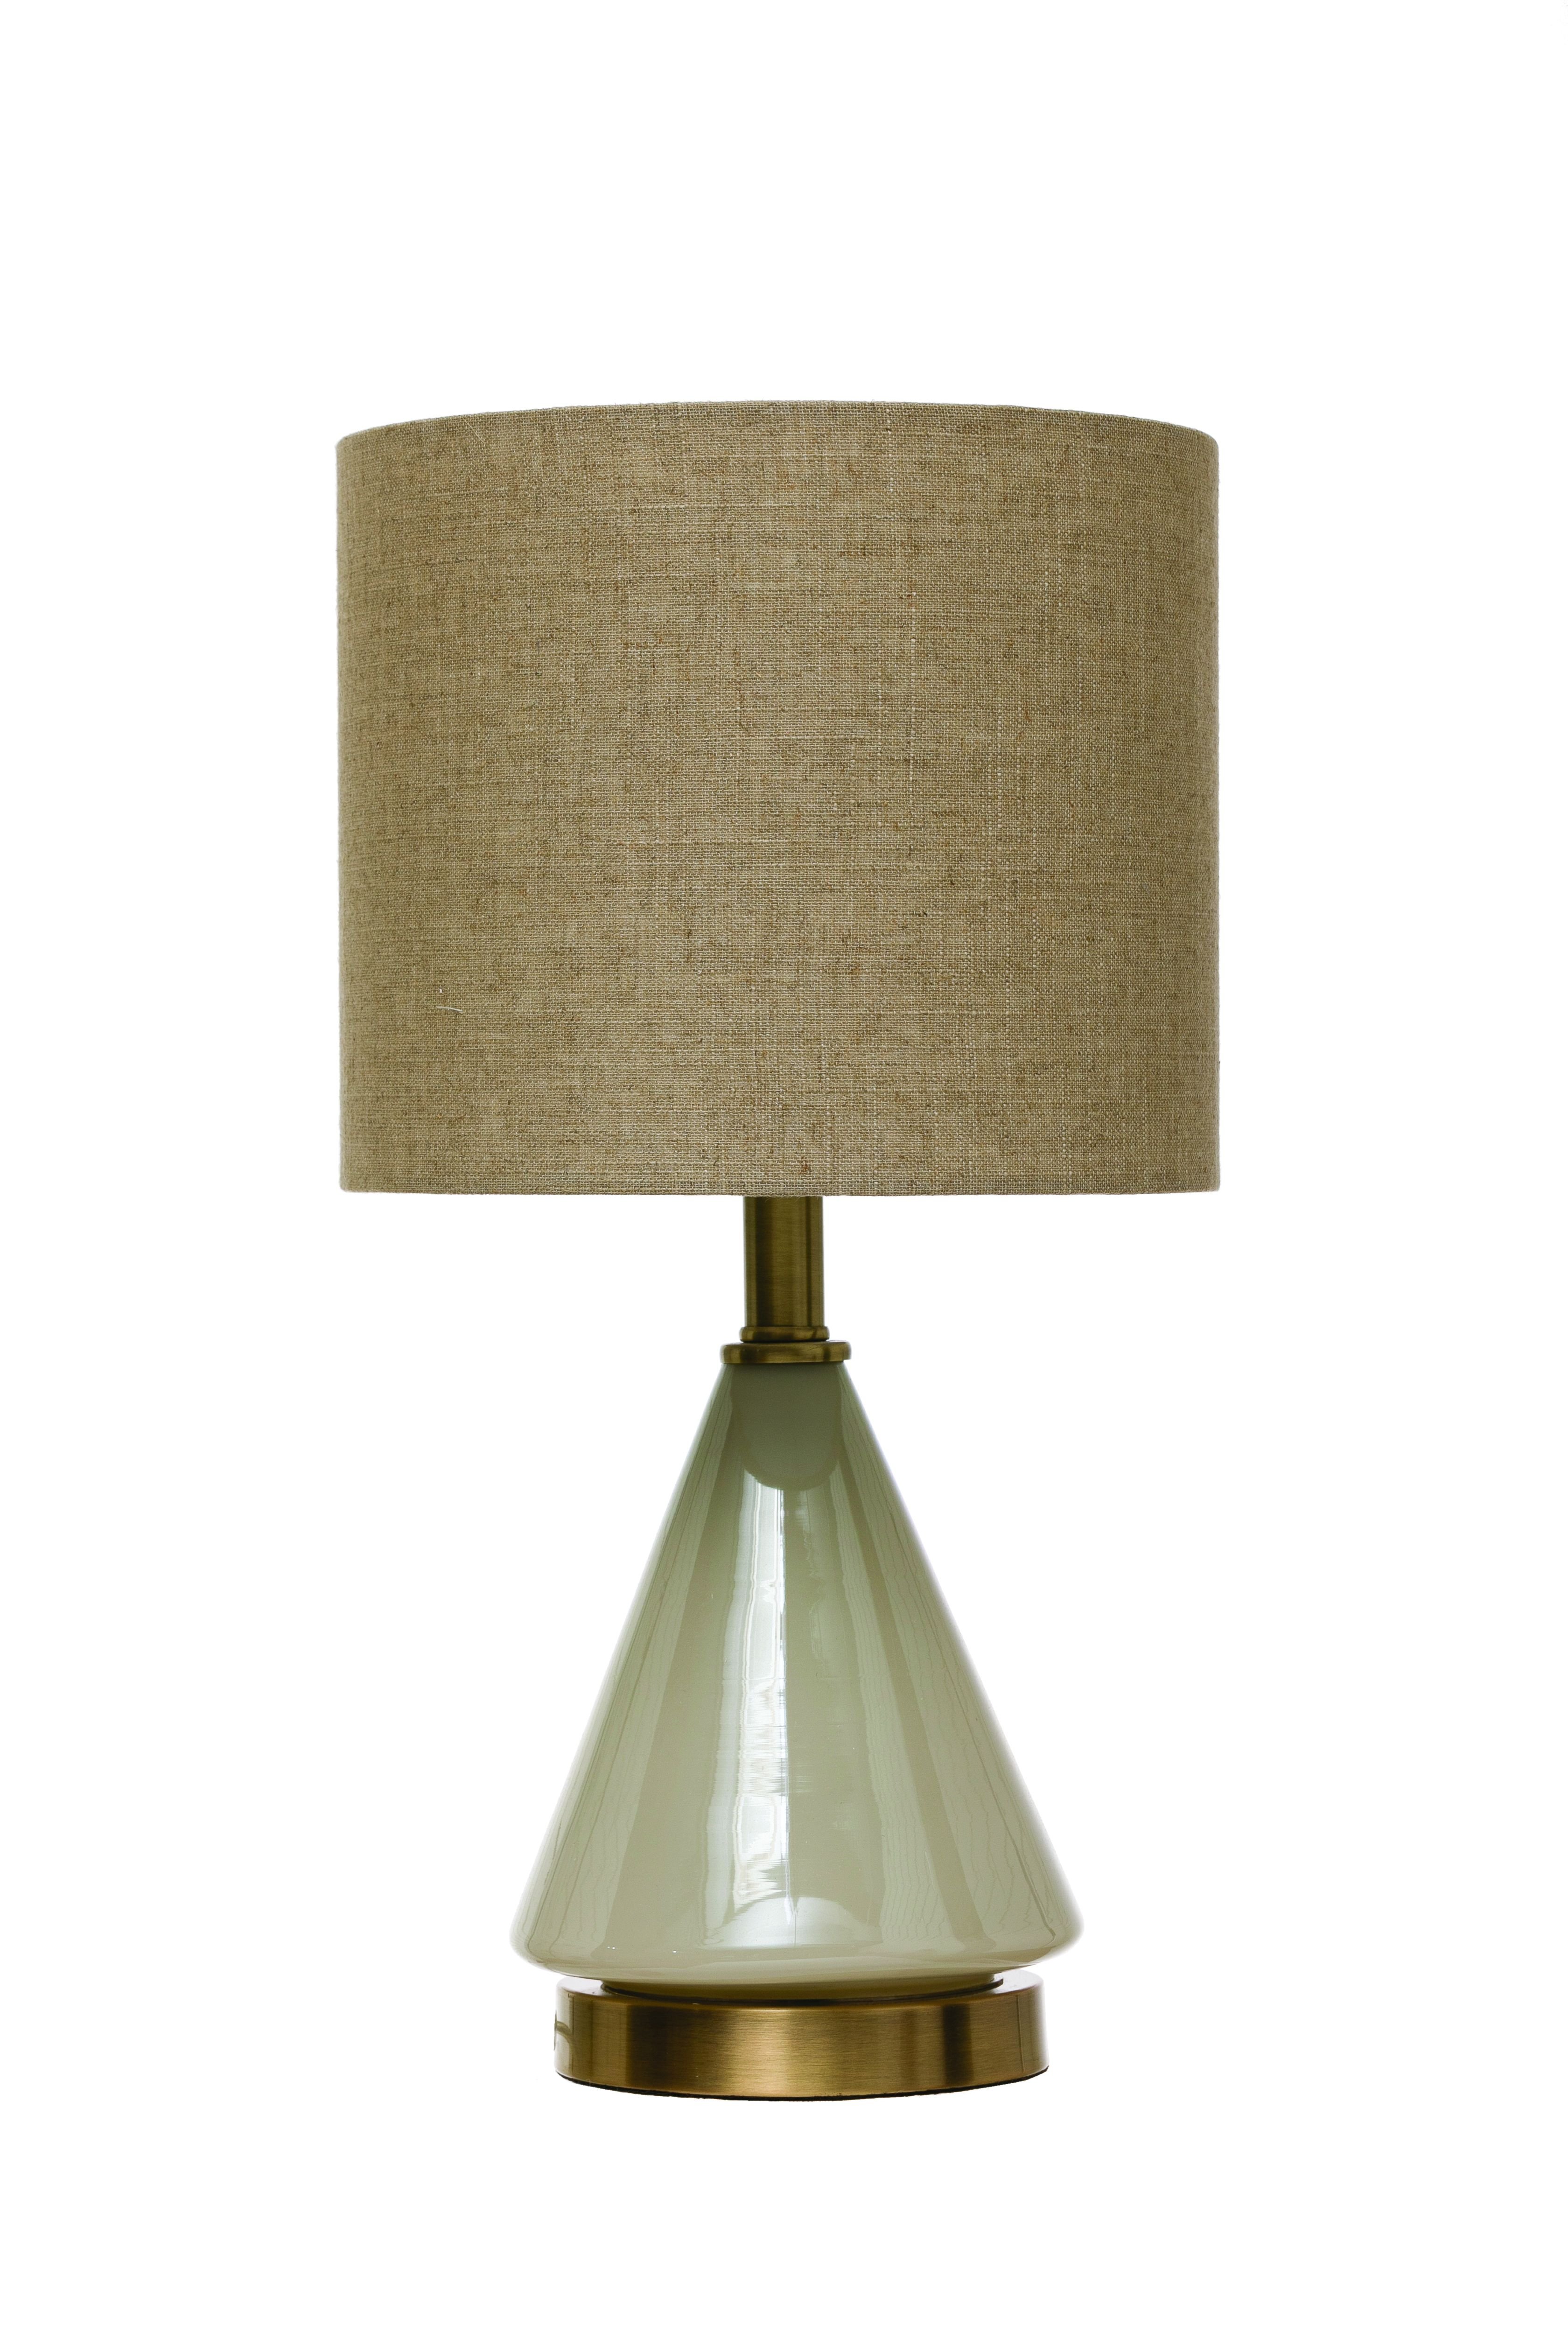 20 in. Glass Table Lamp with Cream Linen Shade with Inline Switch